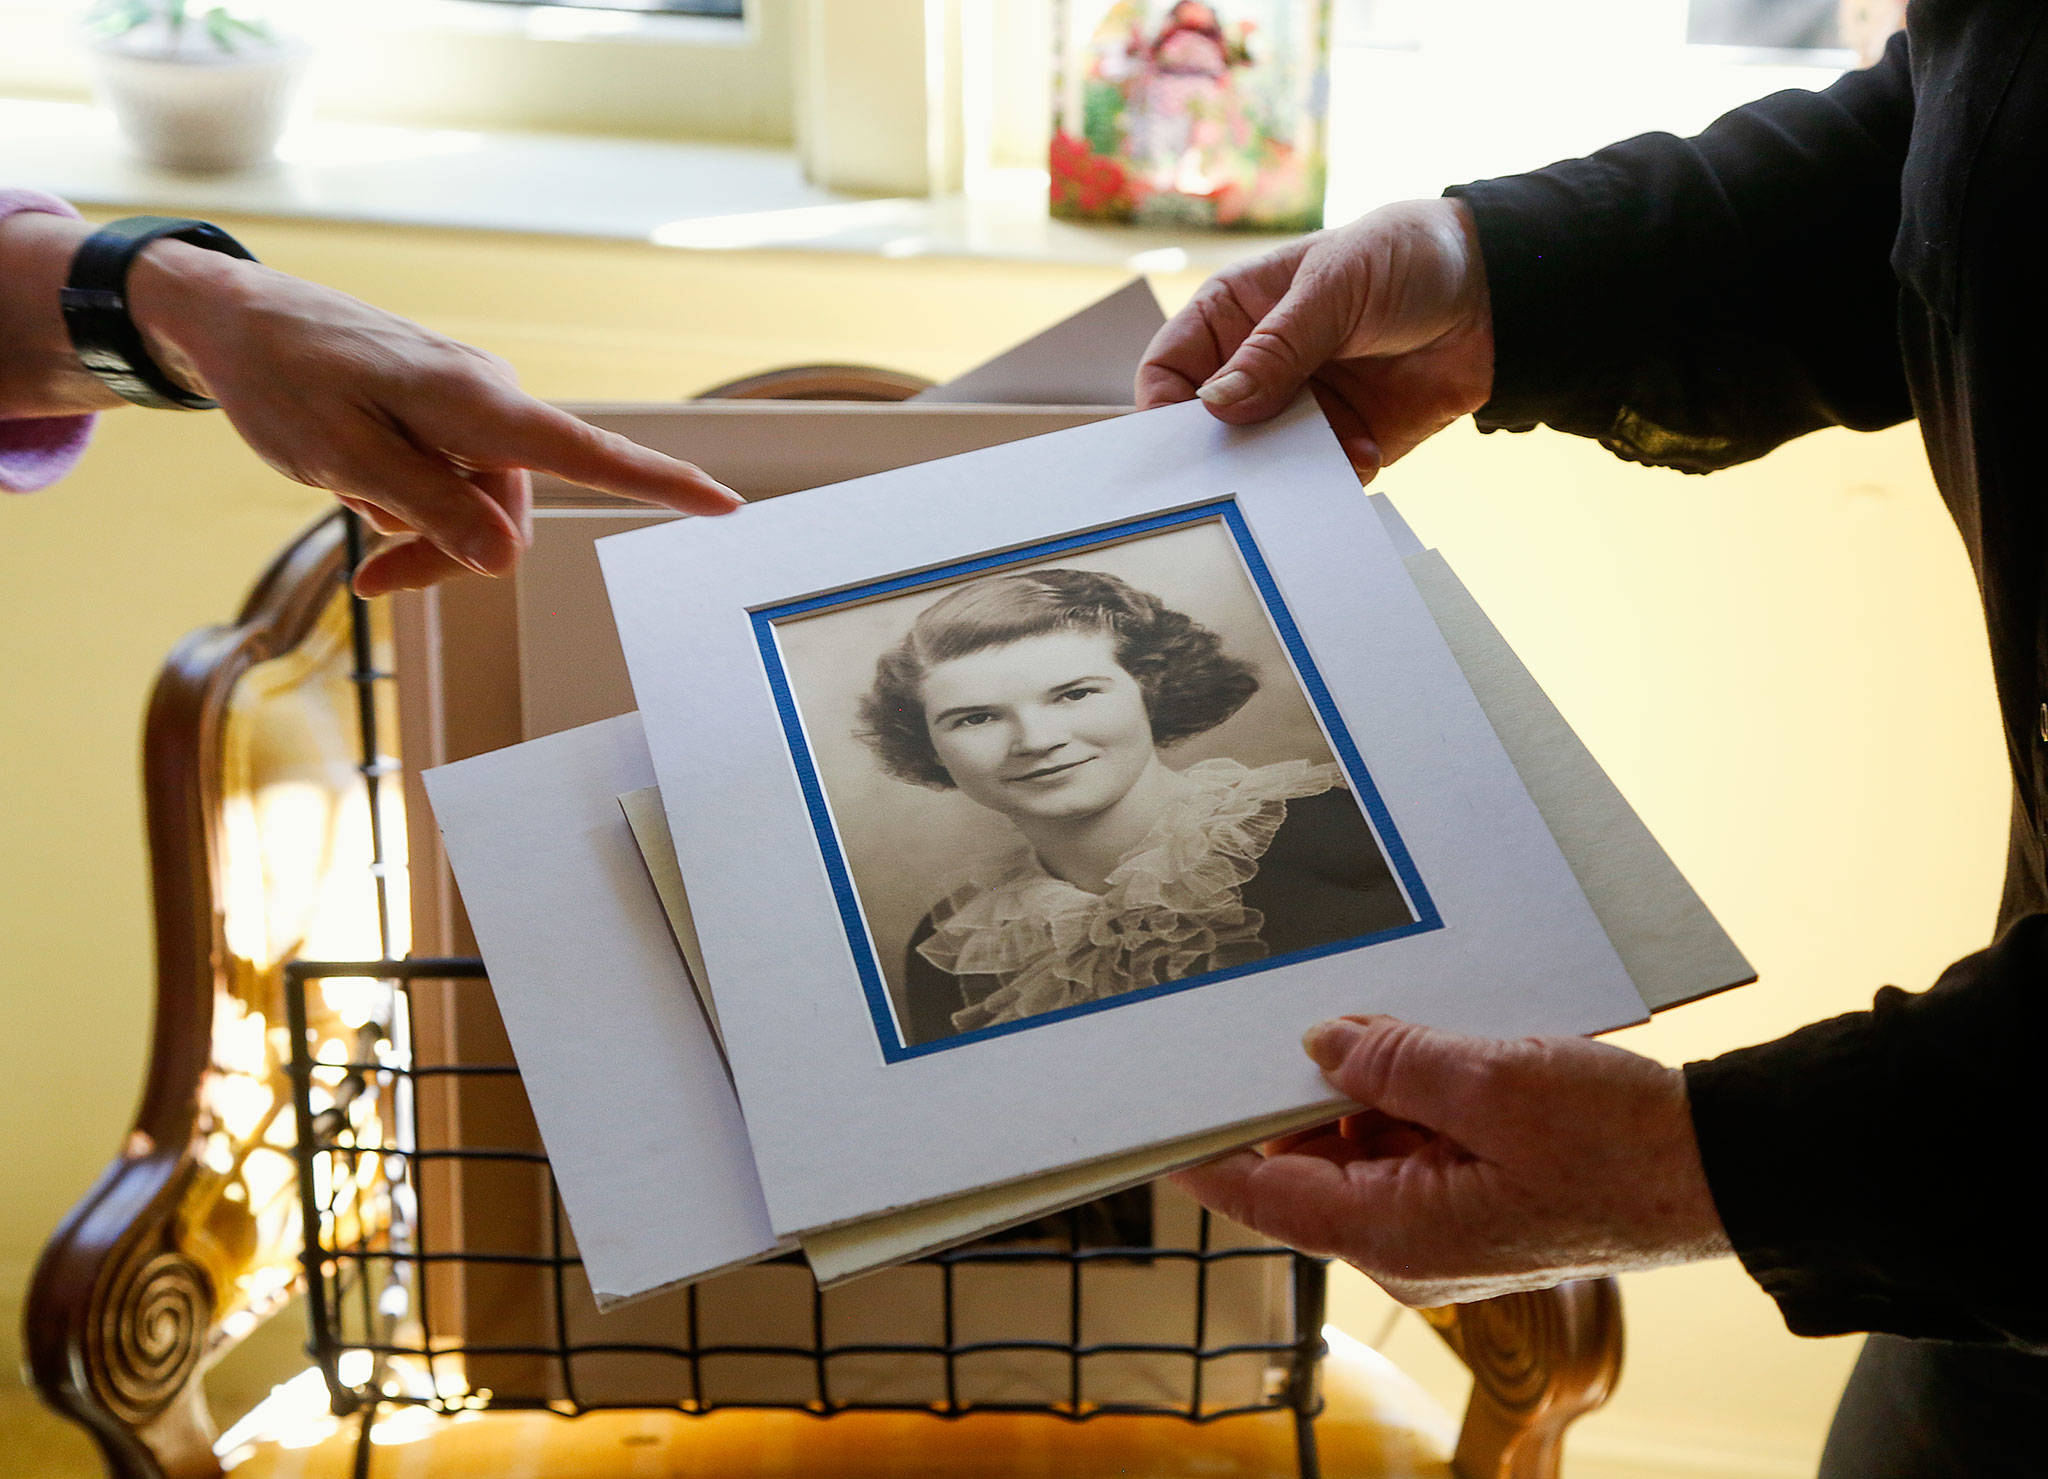 In the north Everett home where she and her sister Margaret “Mugsy” Duryee grew up, Maureen Duryee sorts through photographs of their mother Mary Duryee. This portrait was Mary’s Everett High School 1935 graduation portrait. She died April 22 at age 100. (Dan Bates / The Herald)